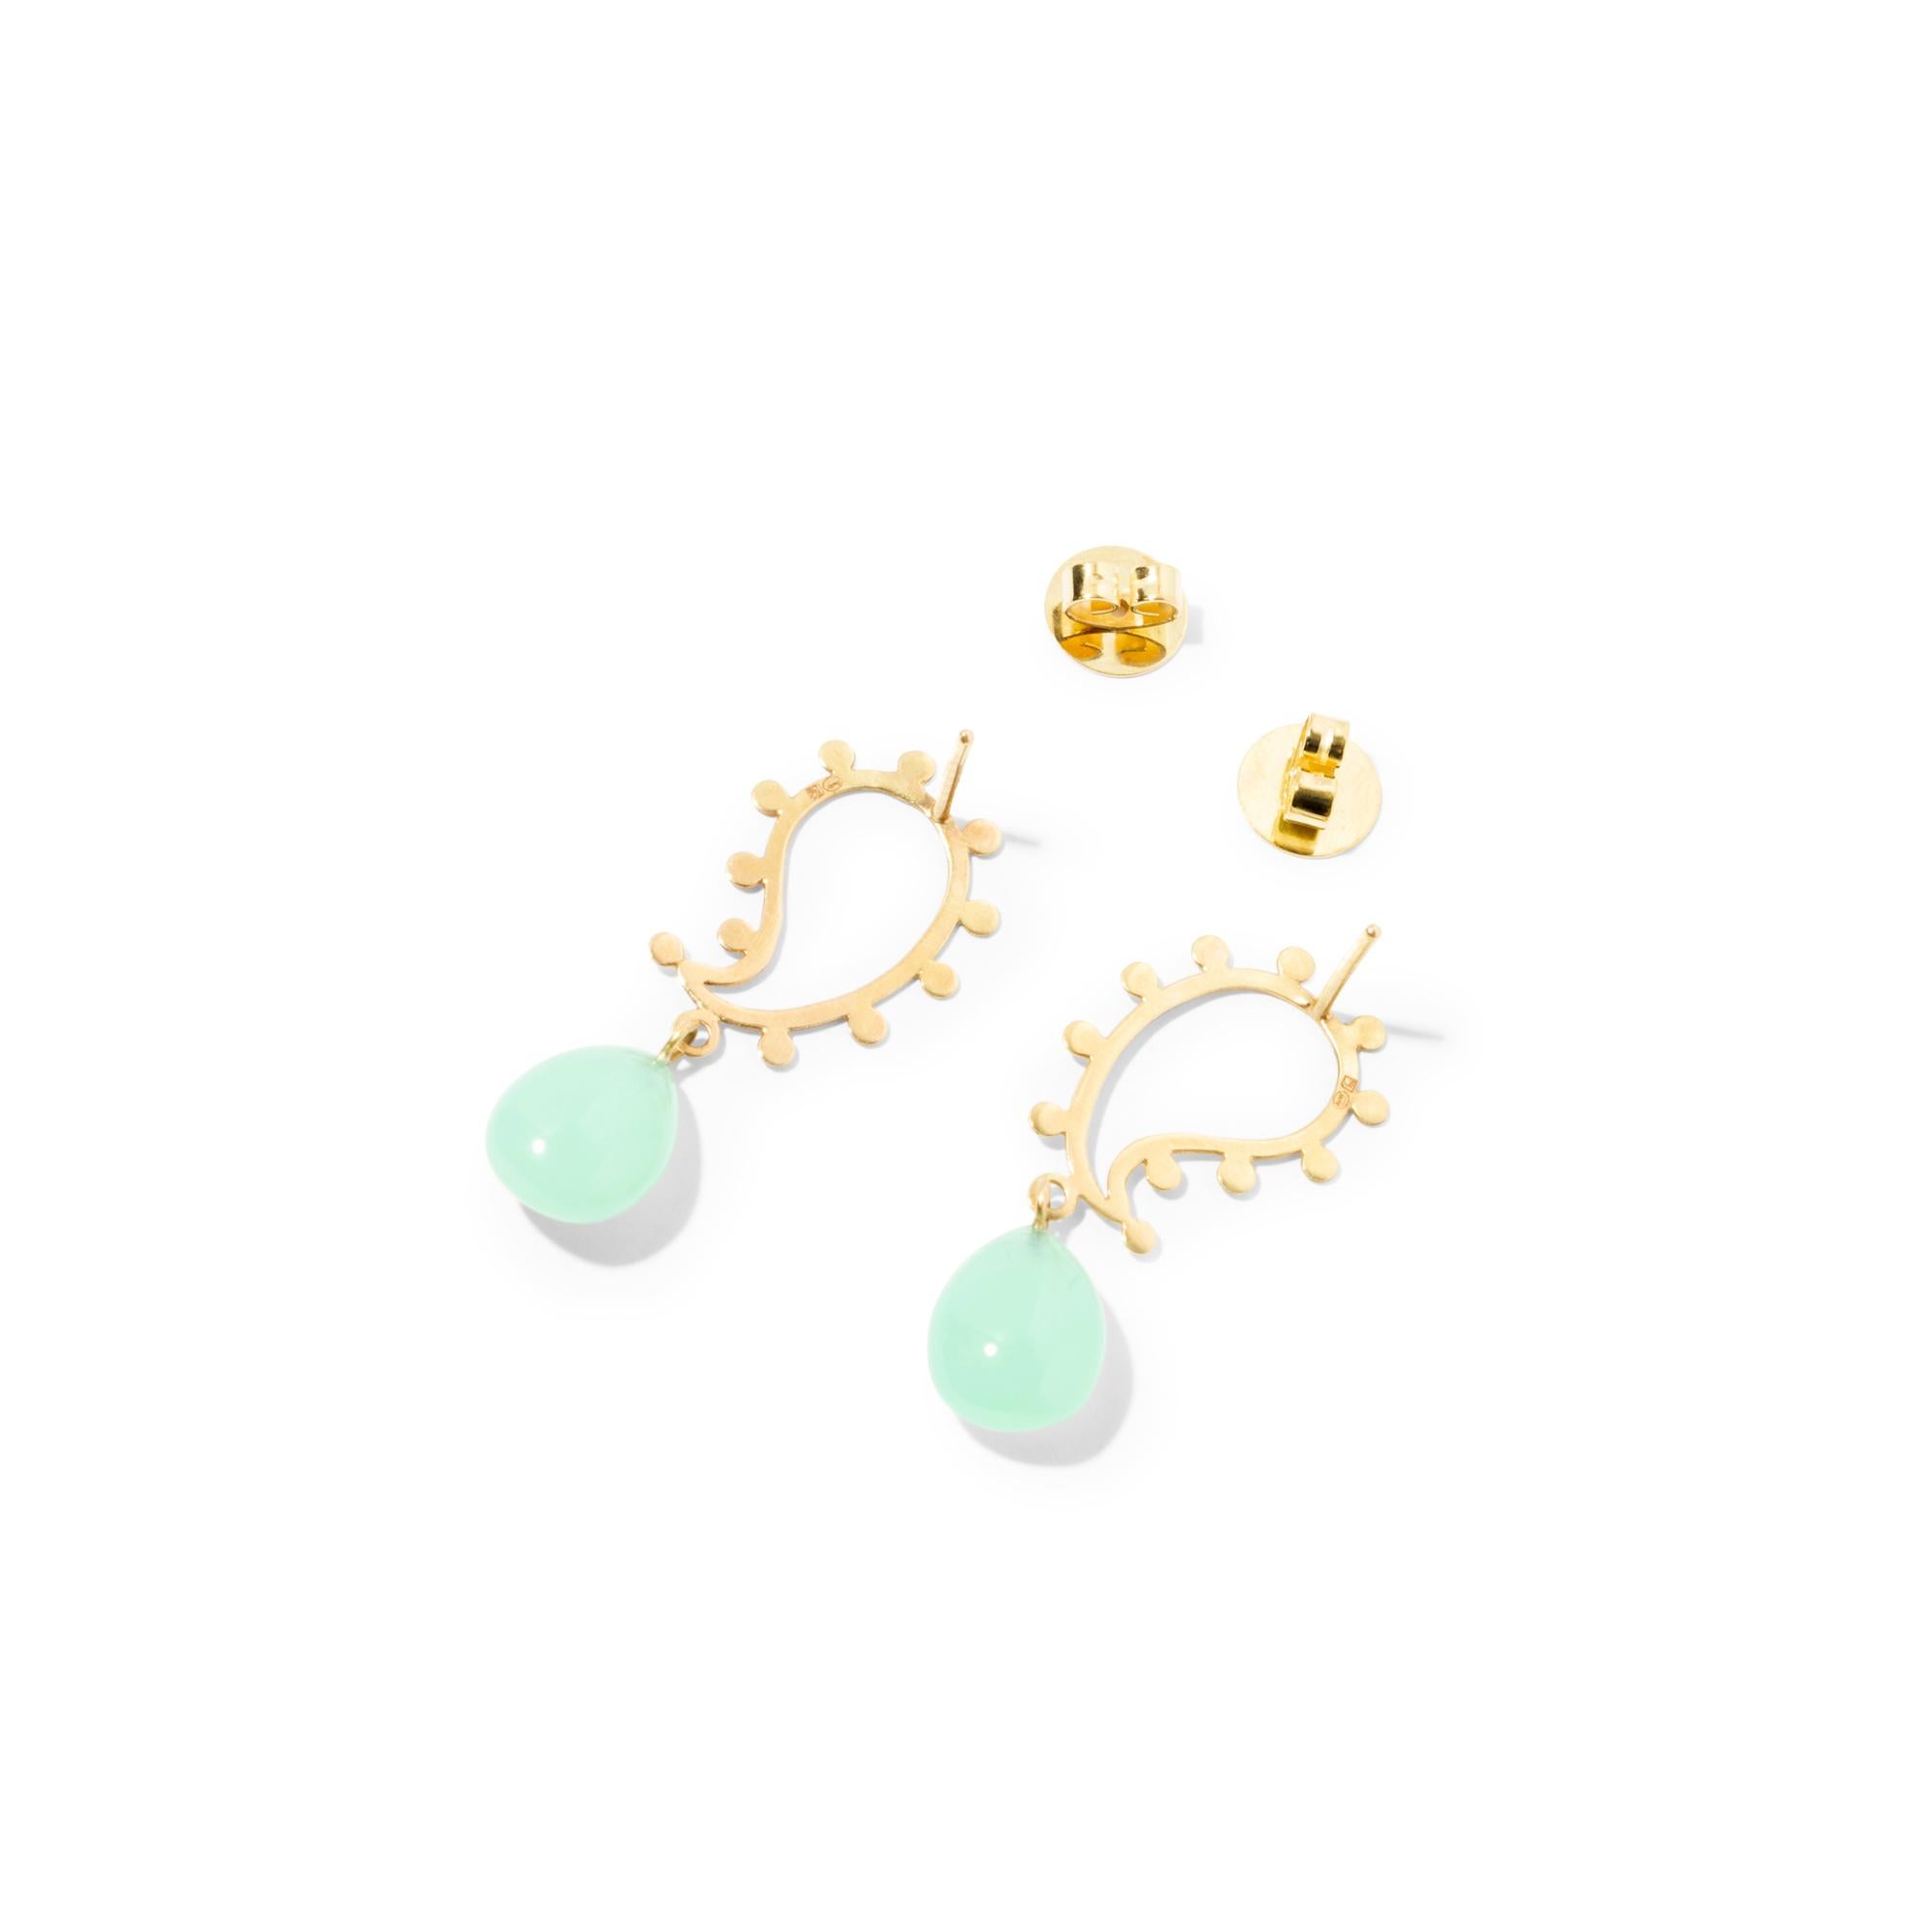 Dainty and lightweight drop earrings with chrysoprase drops suspended from 18k gold paisley motifs.  A subtle way to add a pop of color to your wardrobe. Sits comfortably on the ear and is suitable for wearing all day without becoming heavy.